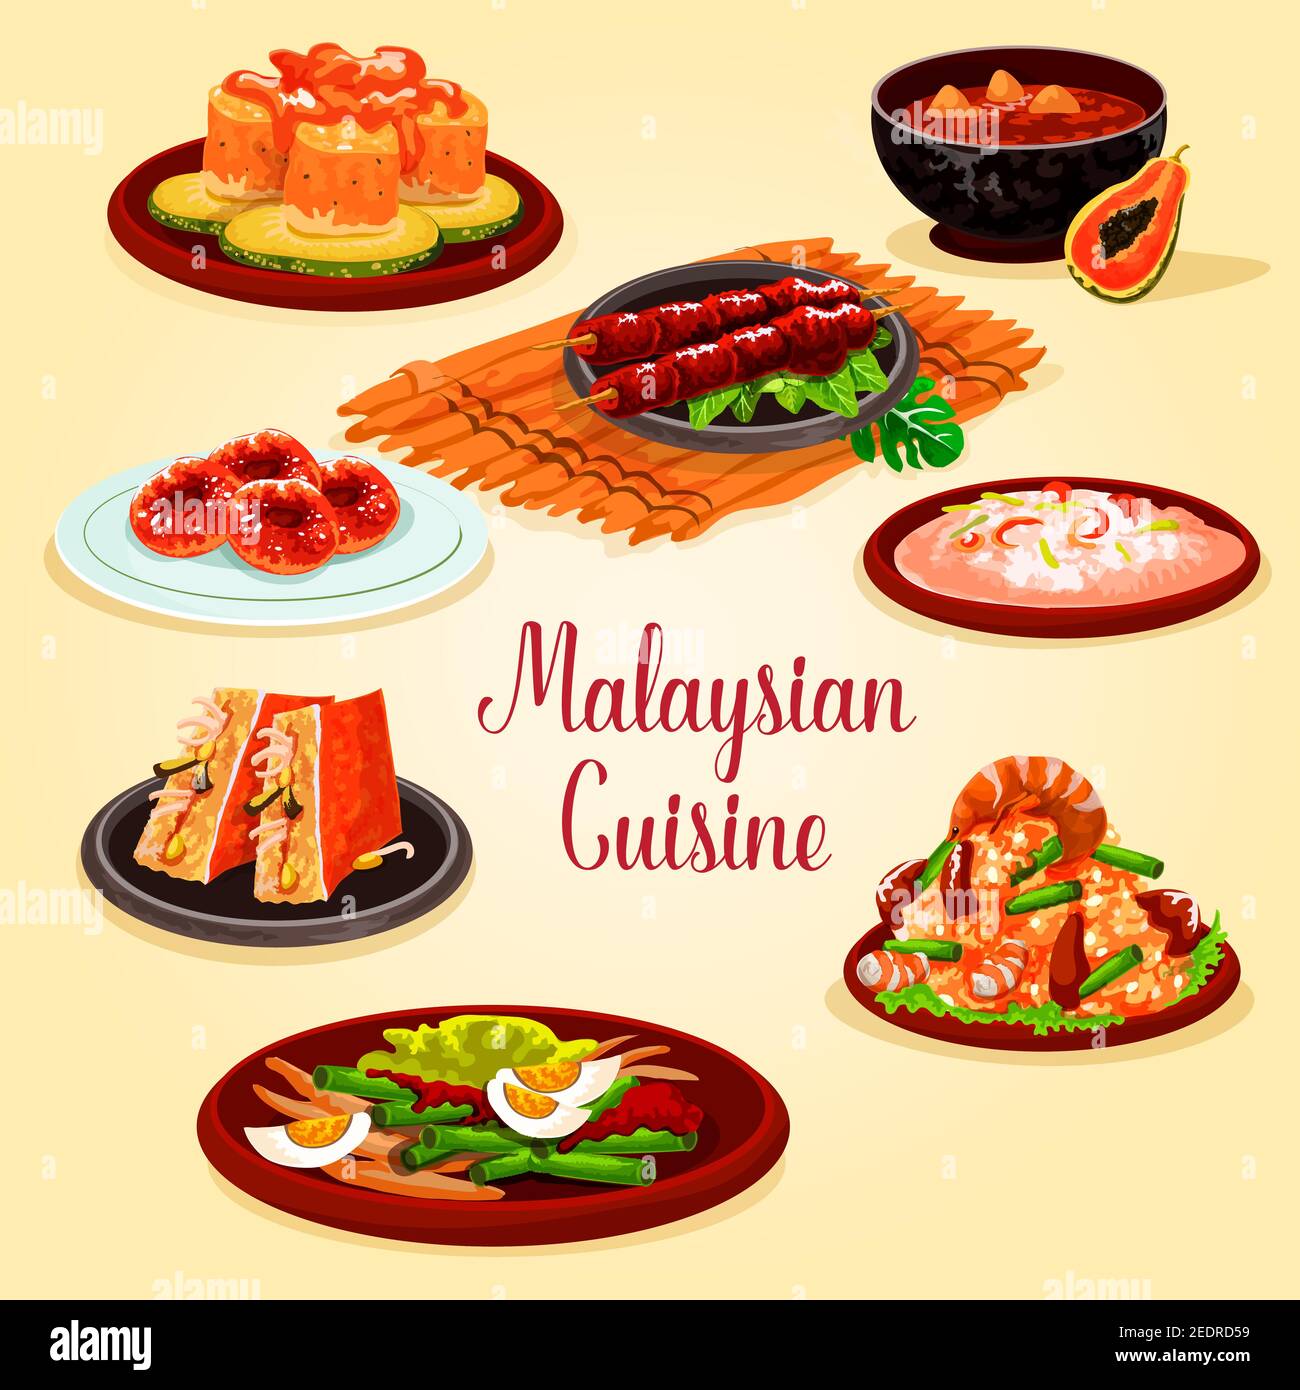 Malaysian cuisine cartoon poster. Grilled chicken, fried rice with bean and prawn, seafood risotto, vegetable salad with egg, stuffed tofu with cucumb Stock Vector